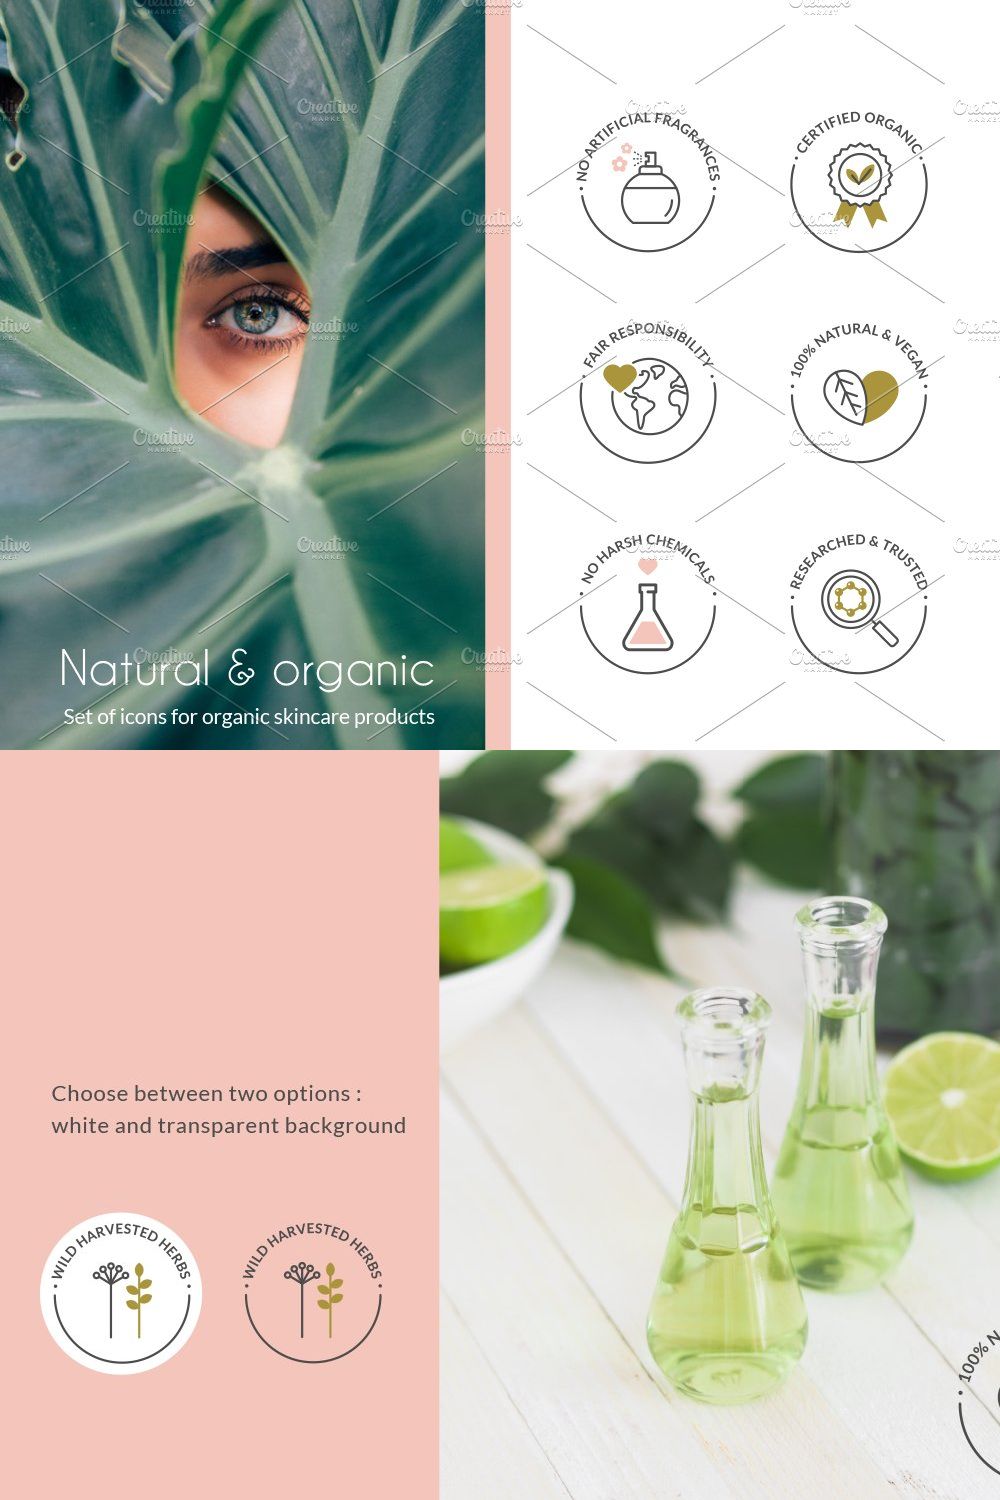 Natural and organic products icons pinterest preview image.